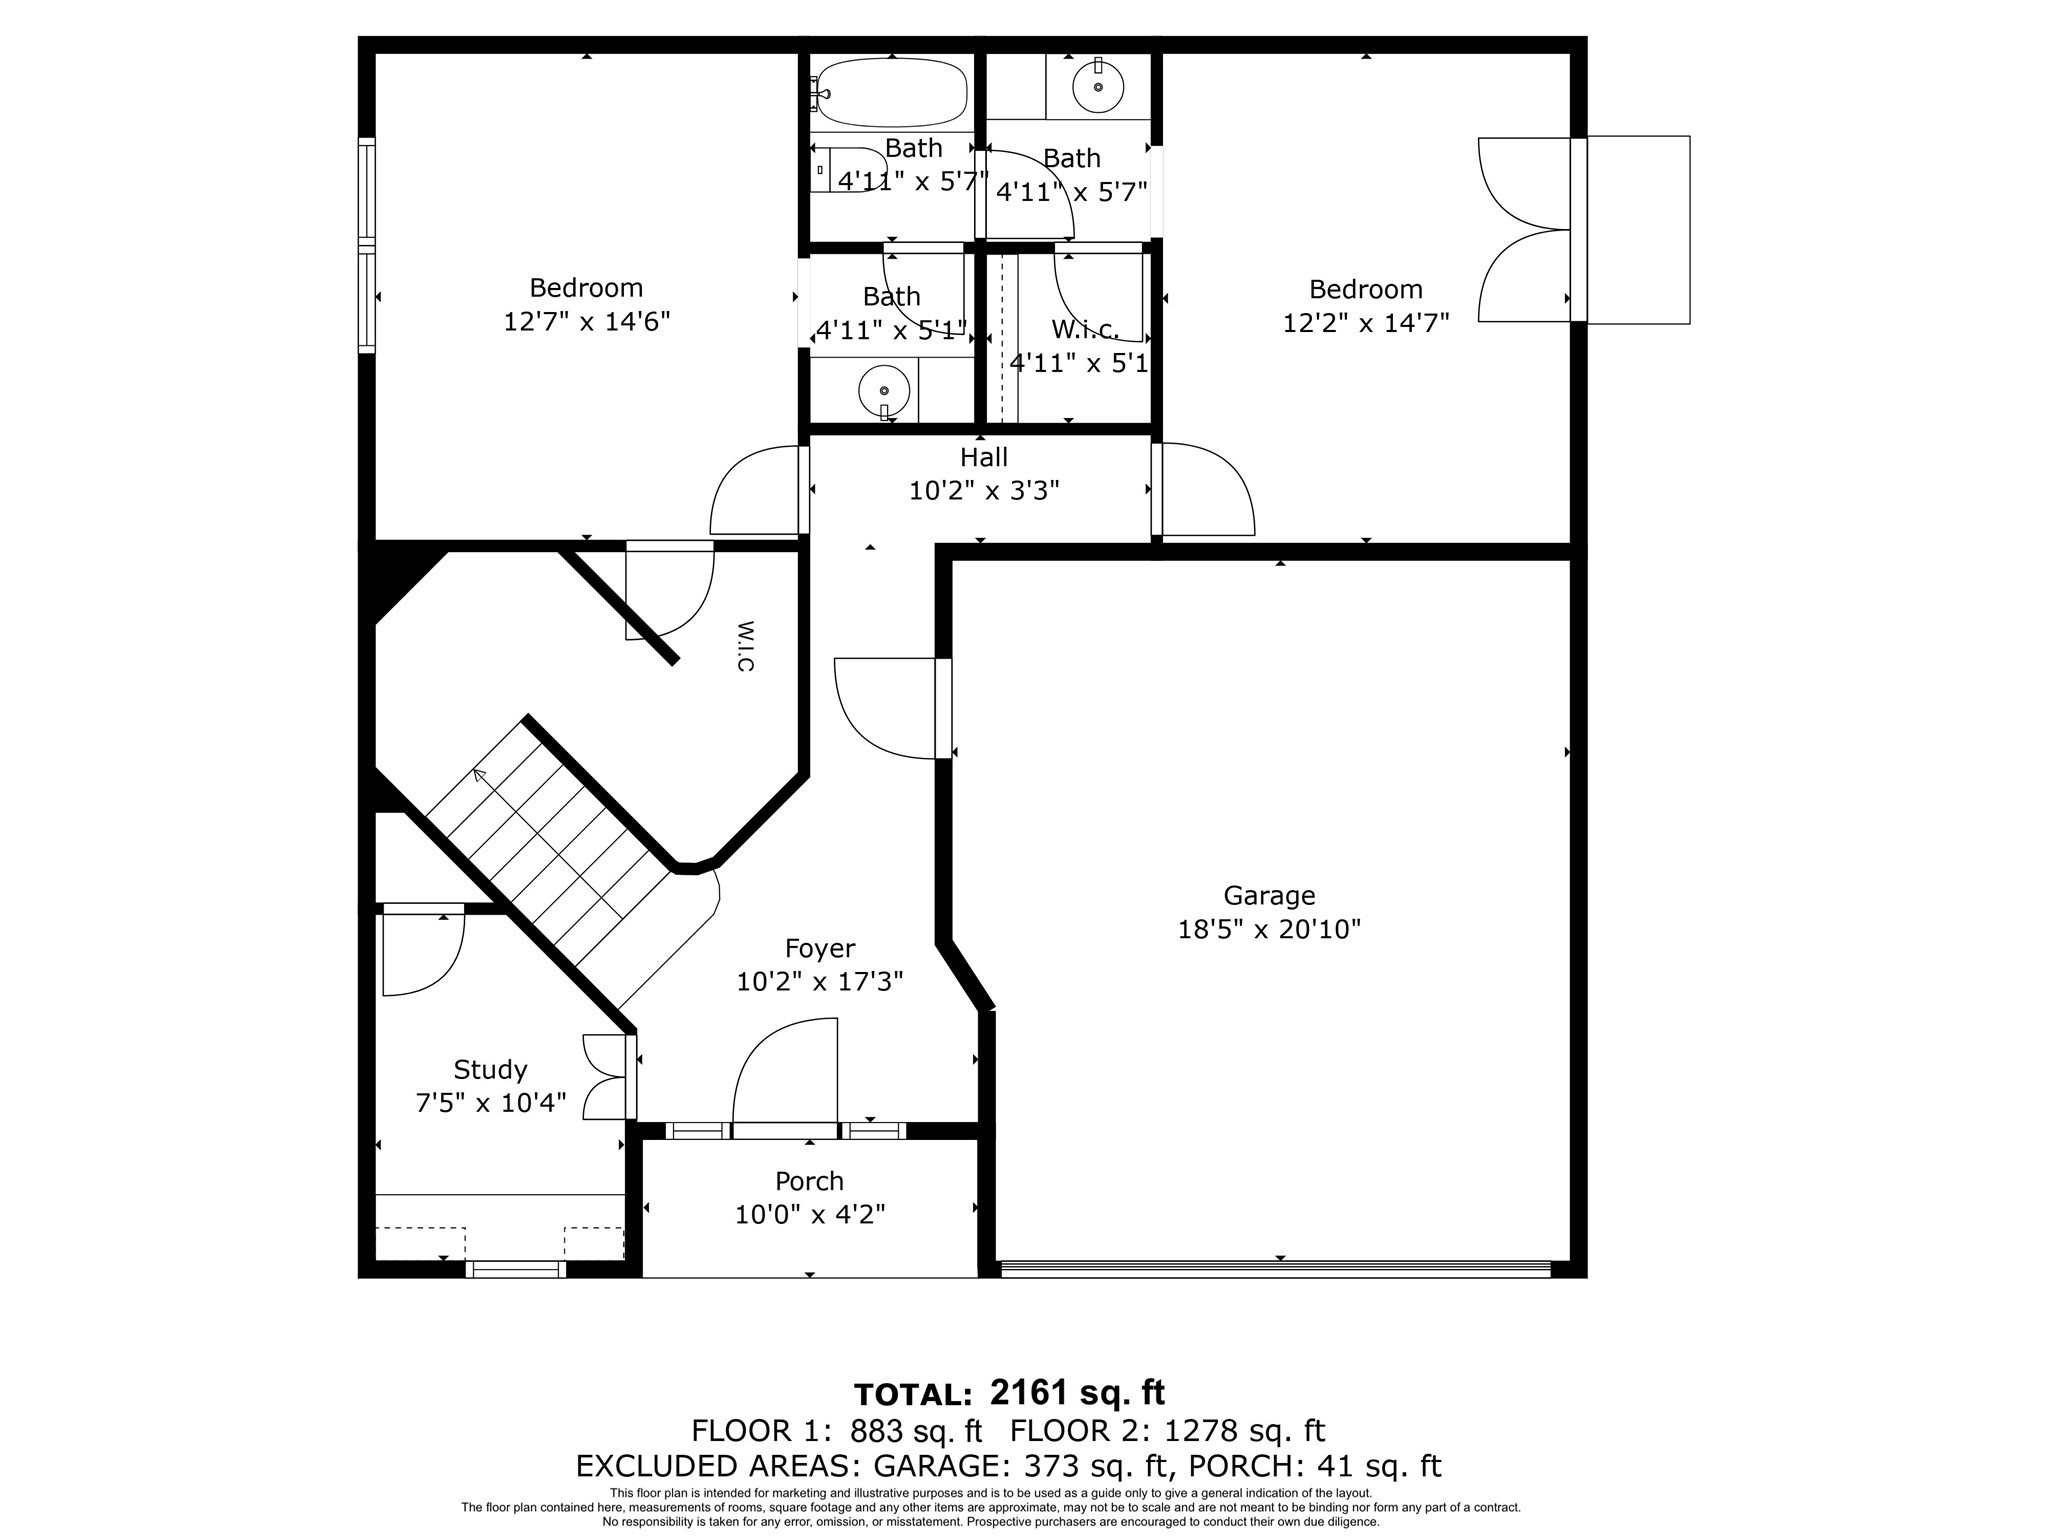 Floor plan of the 2nd level. Room measurements are approximate.